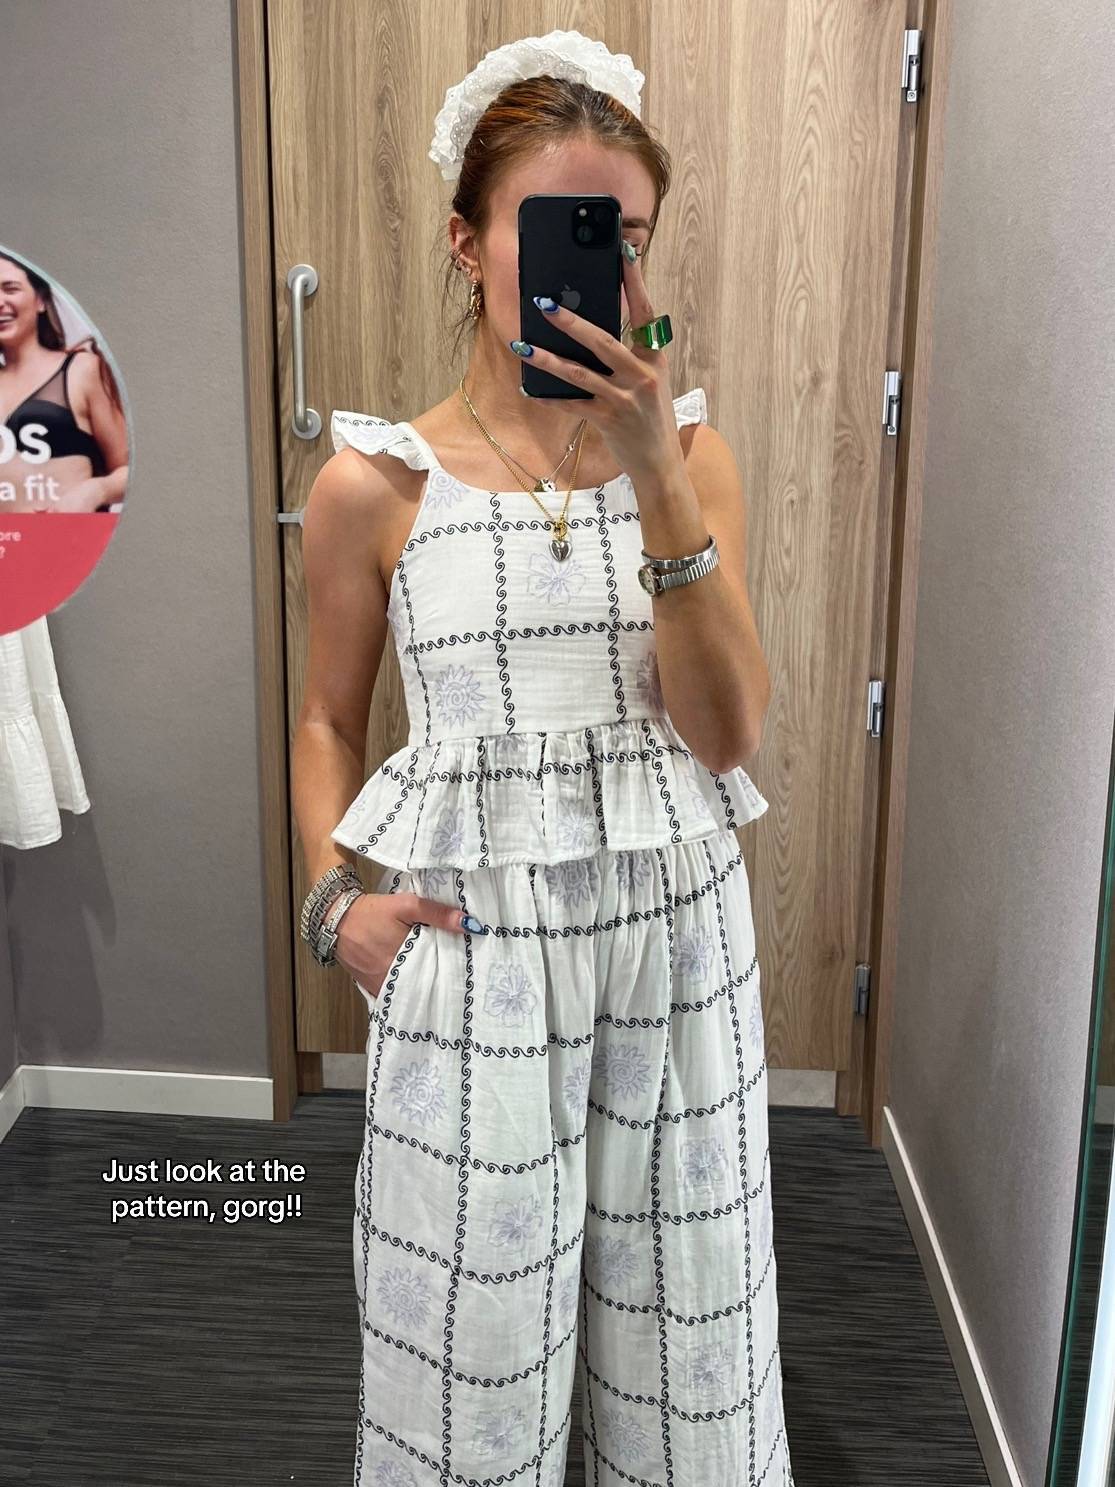 Content creator Helena couldn't get over how good the kids' co-ord looked